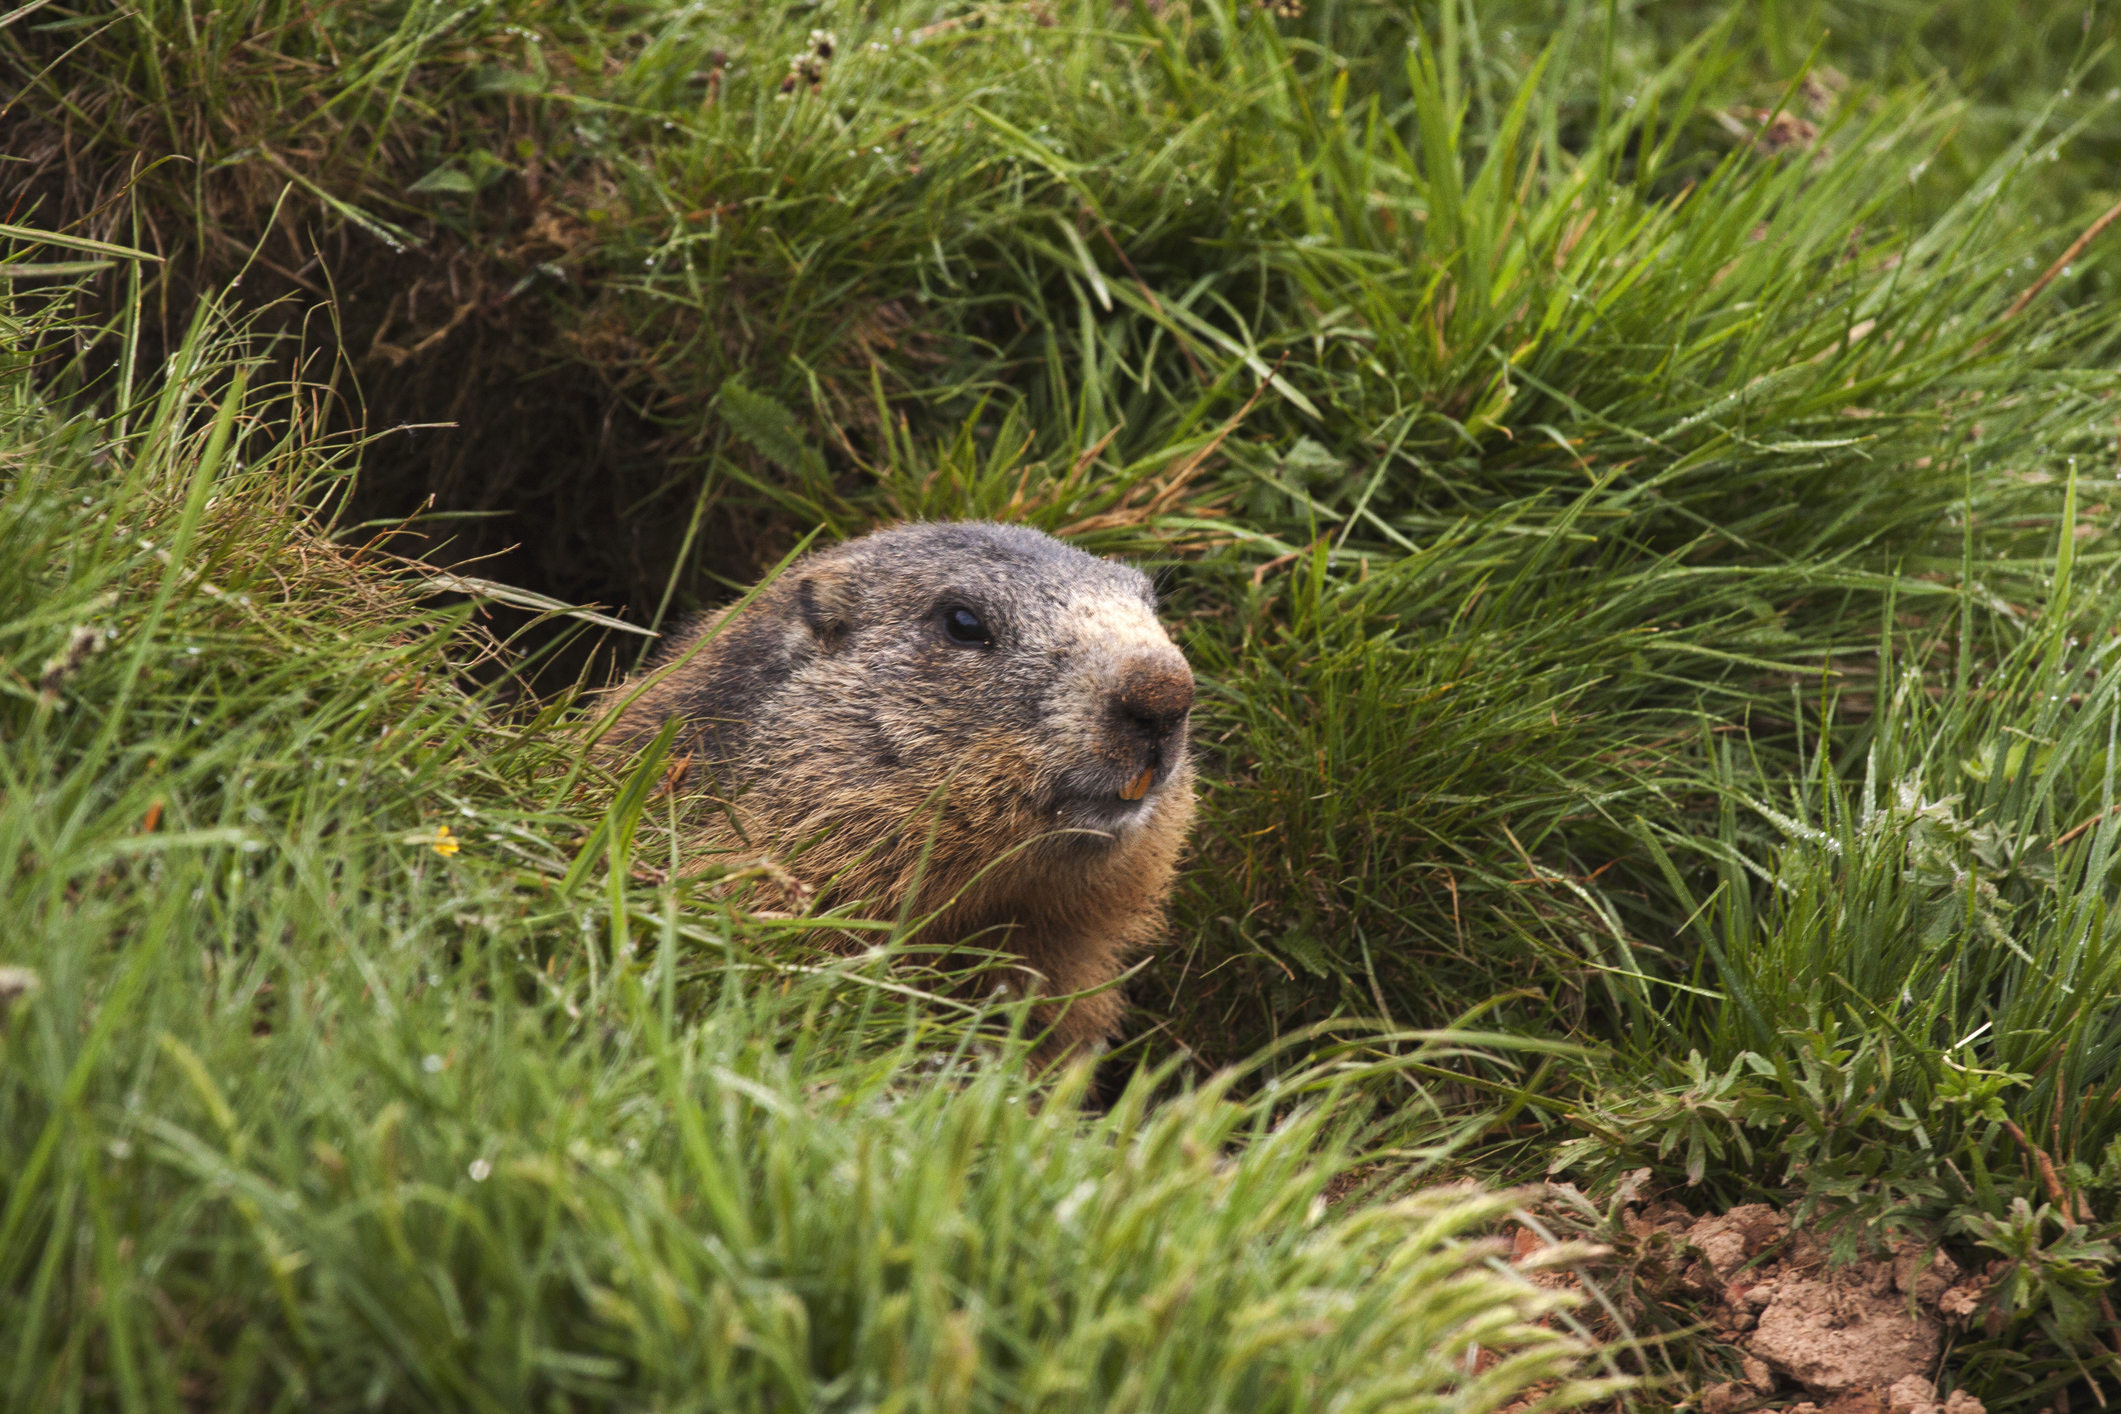 Find out Punxsutawney Phil's age on Groundhog Day 2022